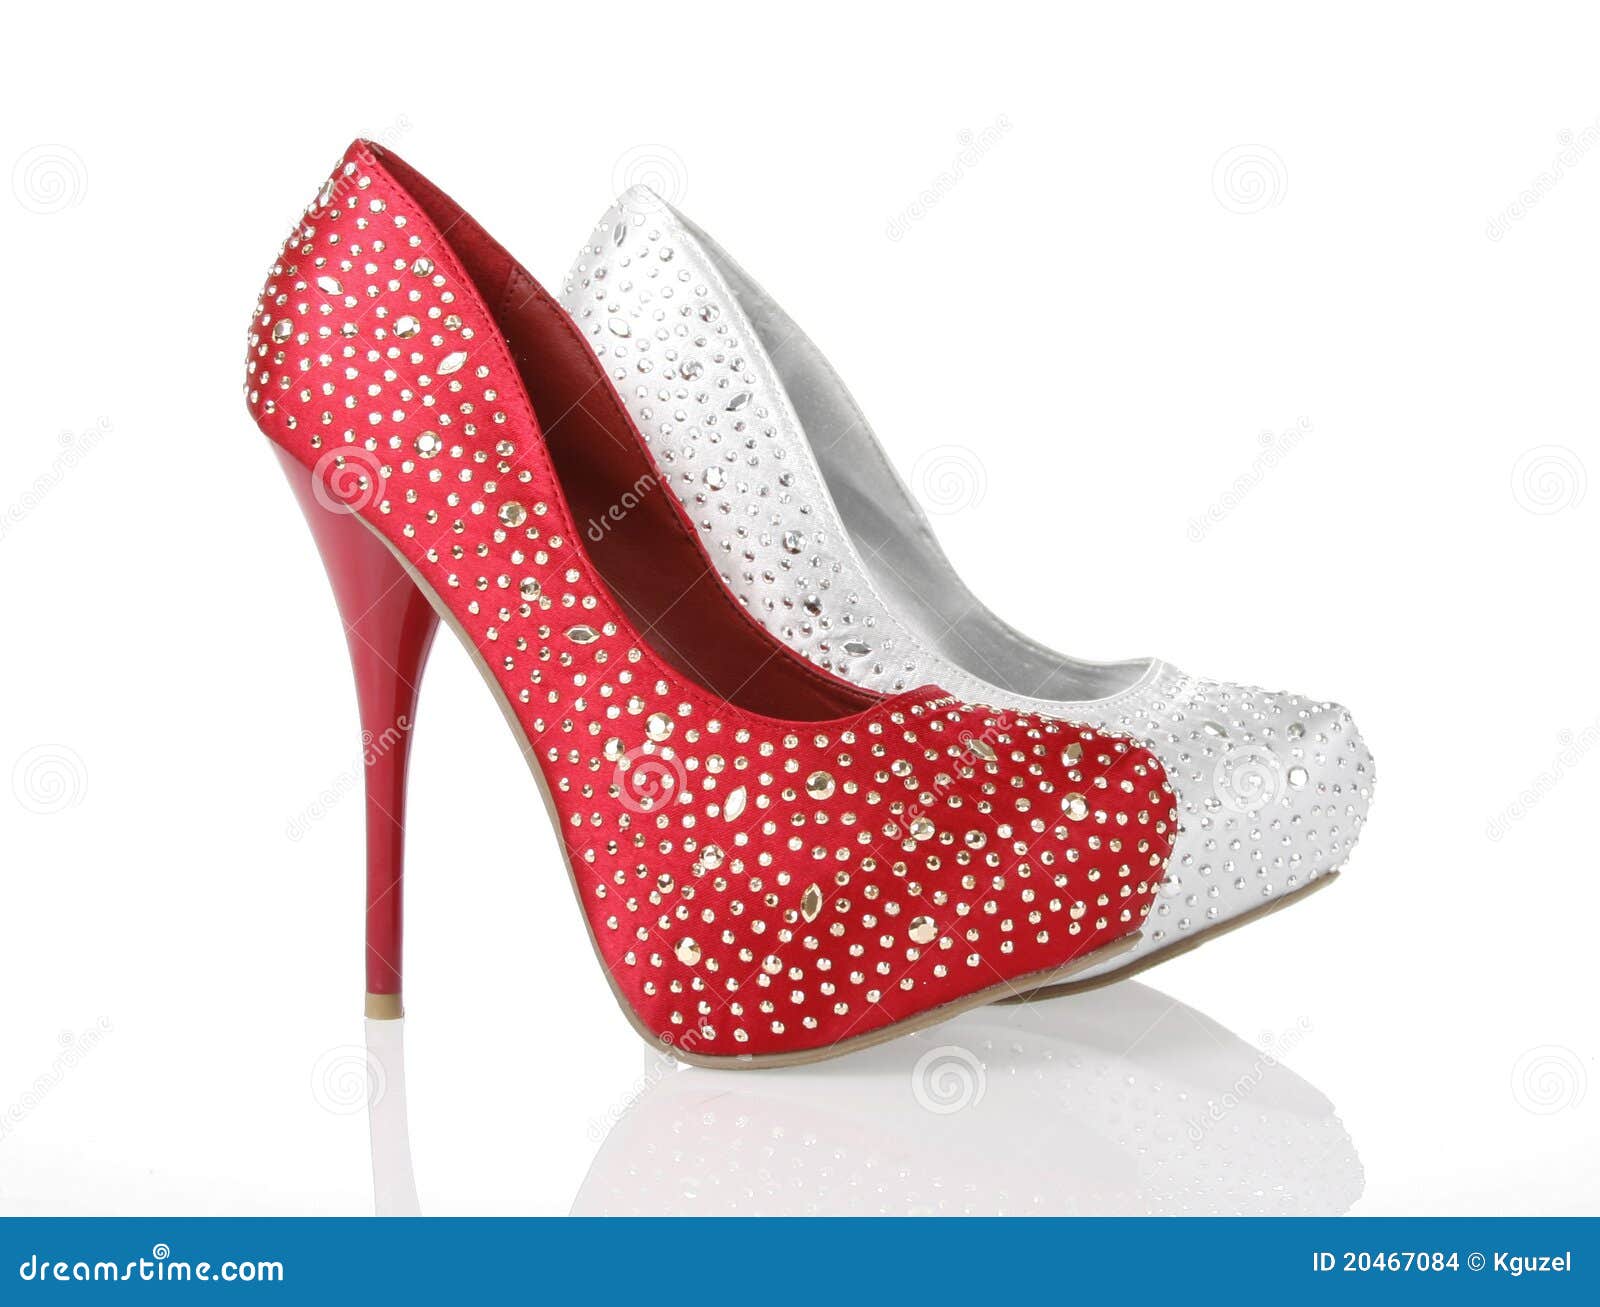 More similar stock images of ` Jeweled Red and Silver Shoes `